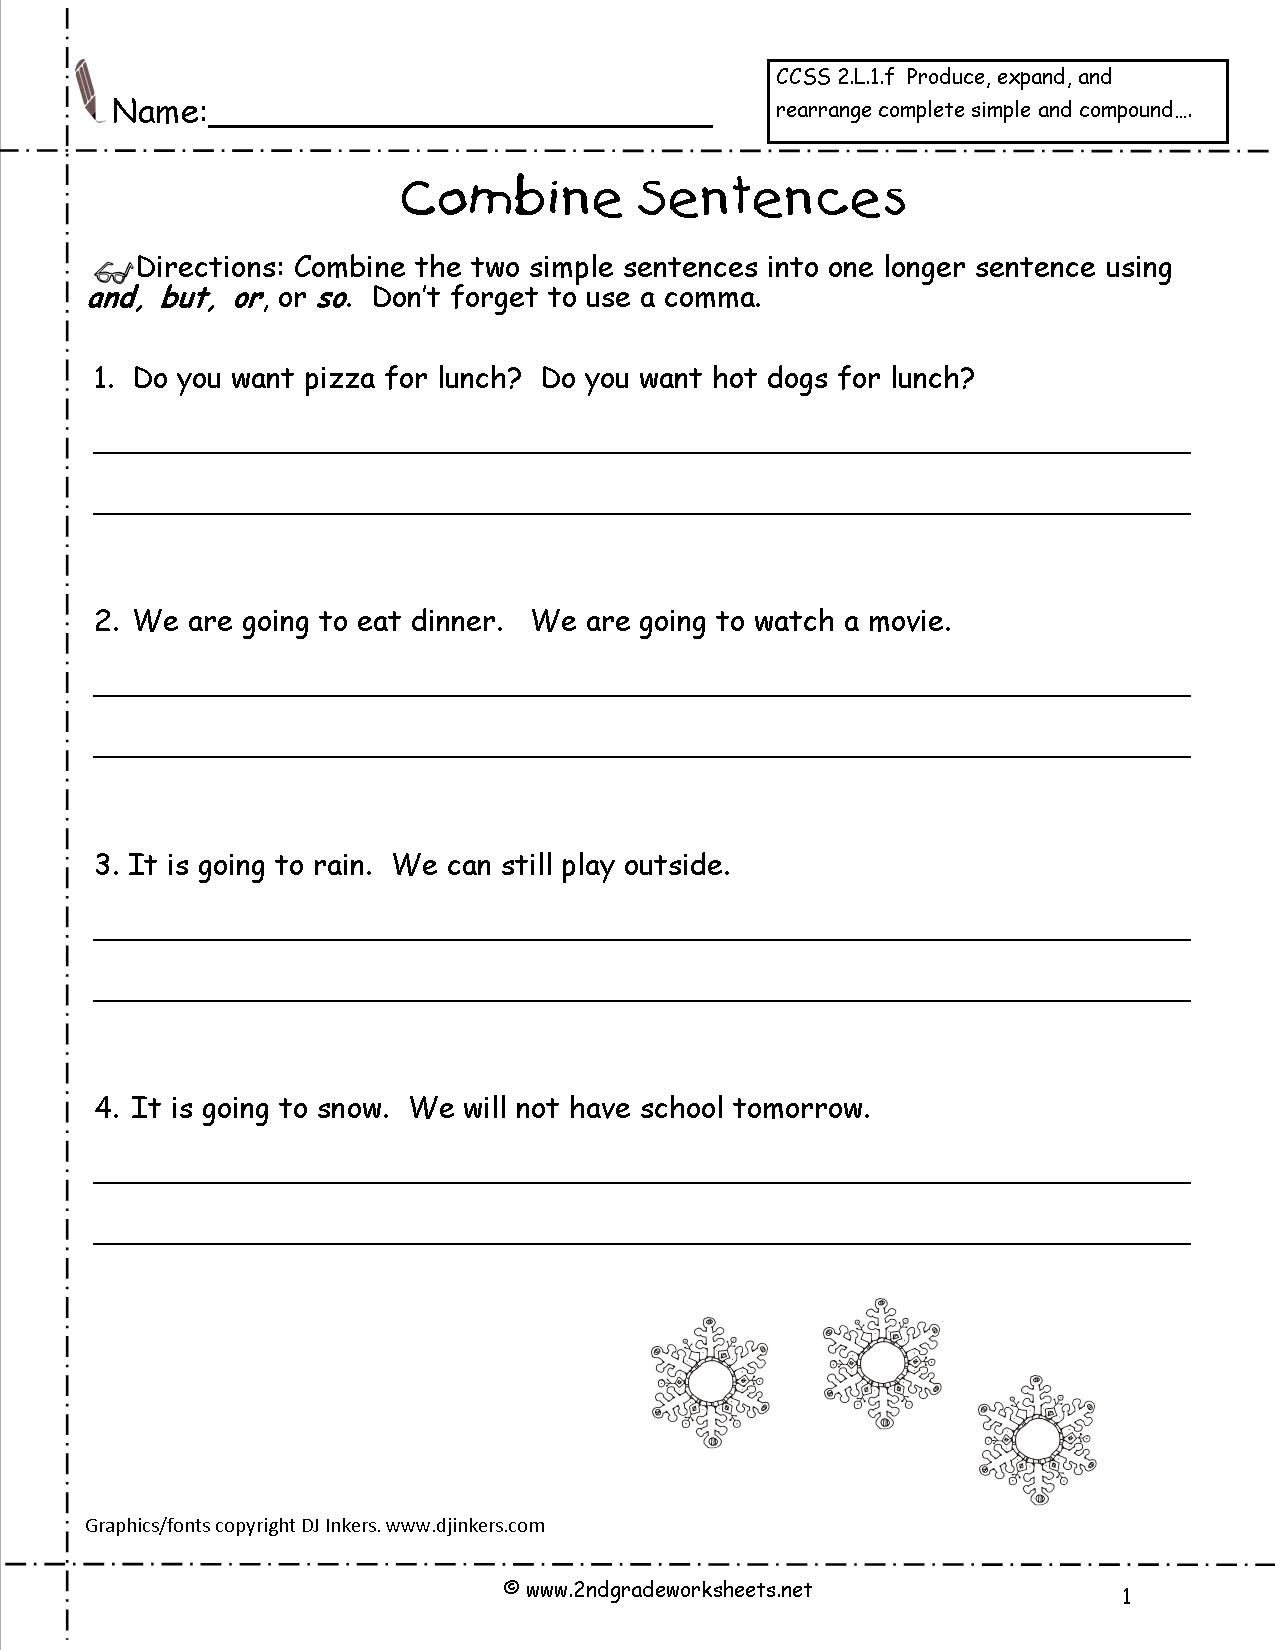 Free Language/grammar Worksheets And Printouts - Free Printable | Free Printable Grammar Worksheets For 2Nd Grade